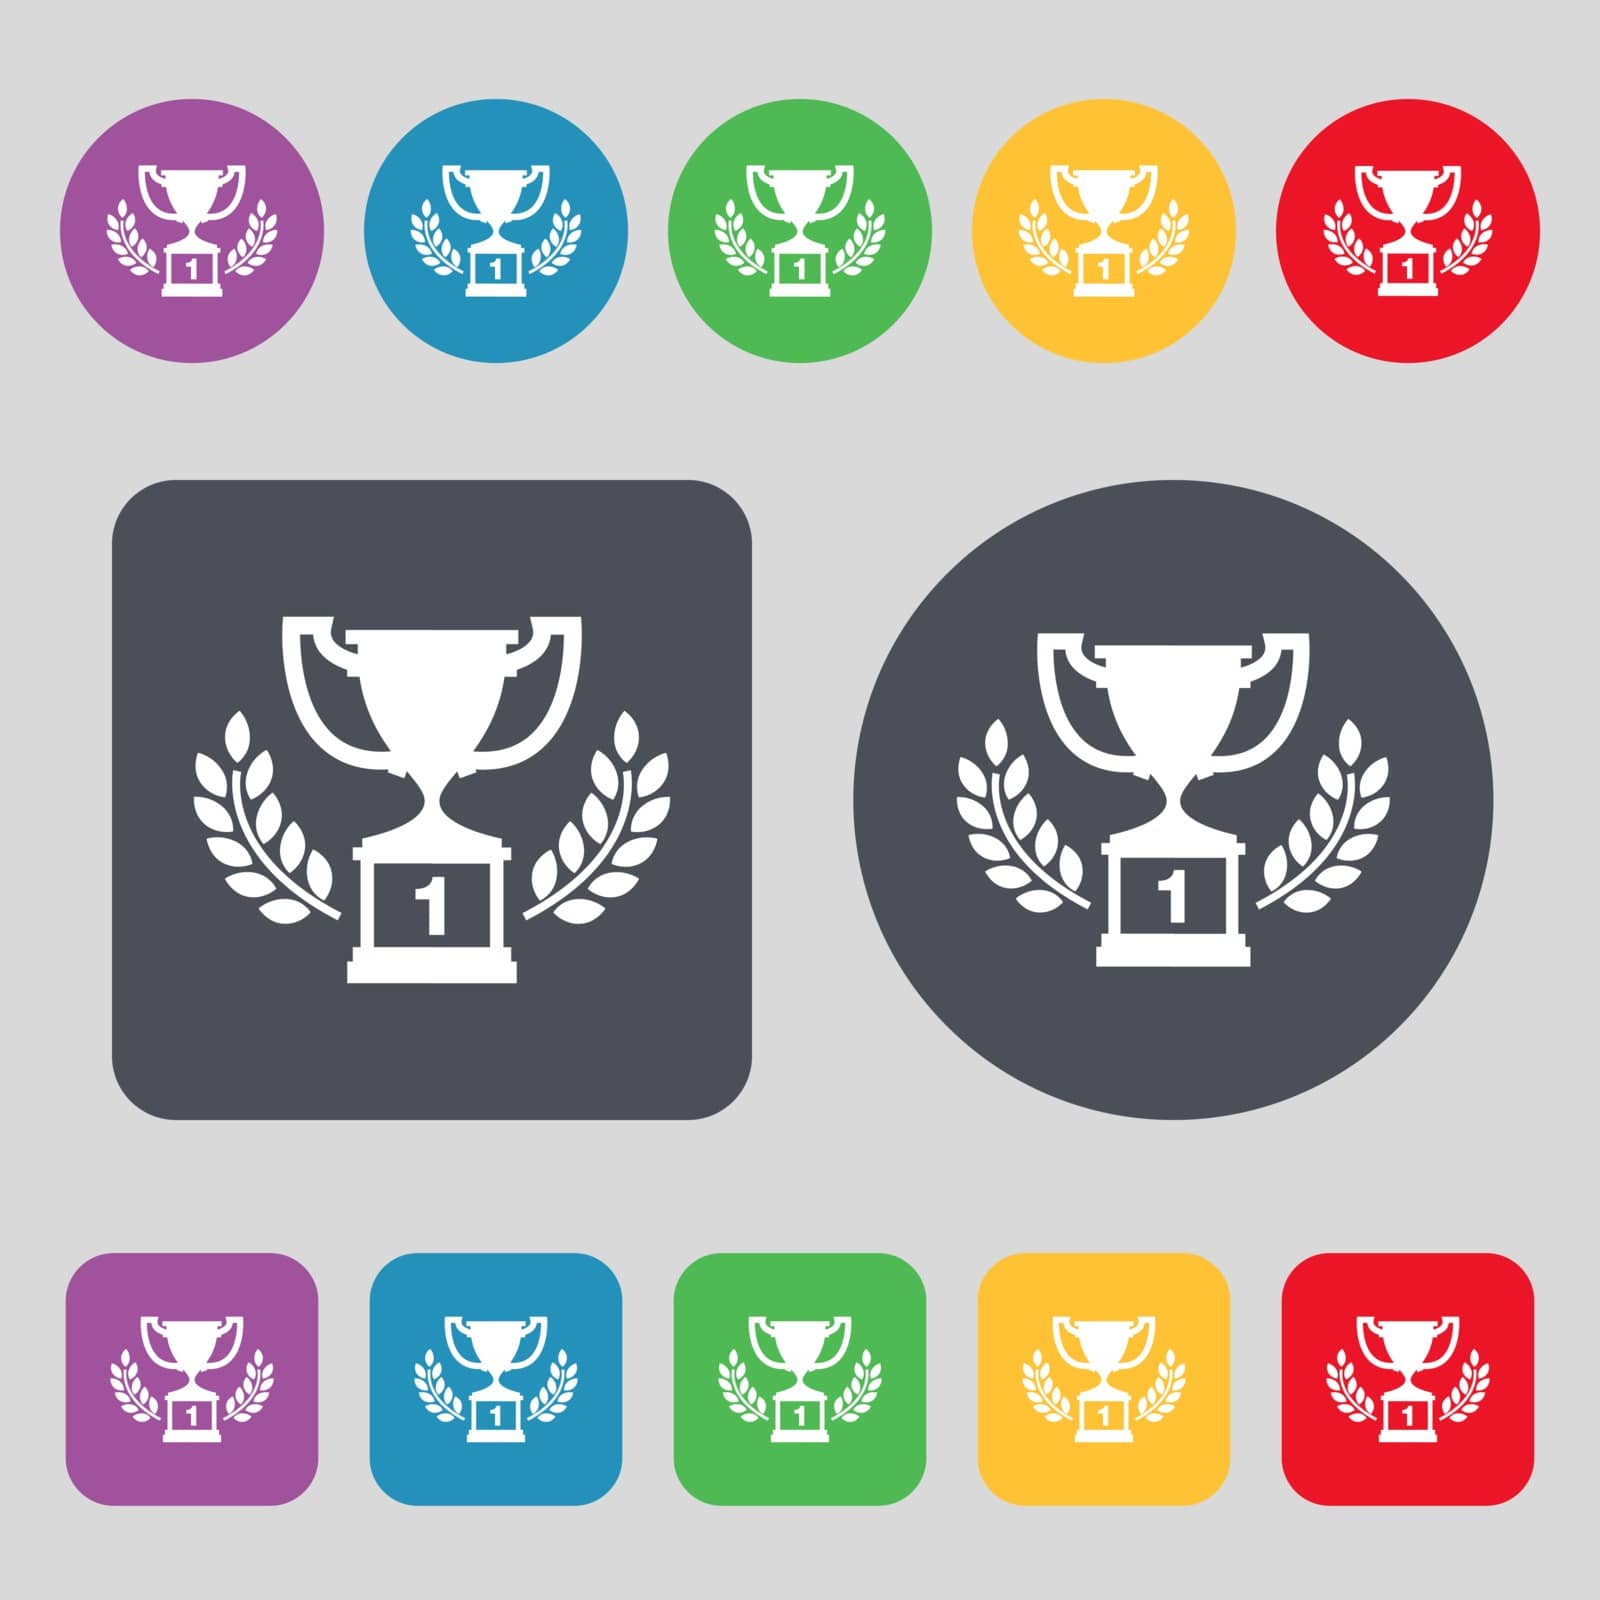 Champions cup, Trophy icon sign. A set of 12 colored buttons. Flat design. Vector illustration